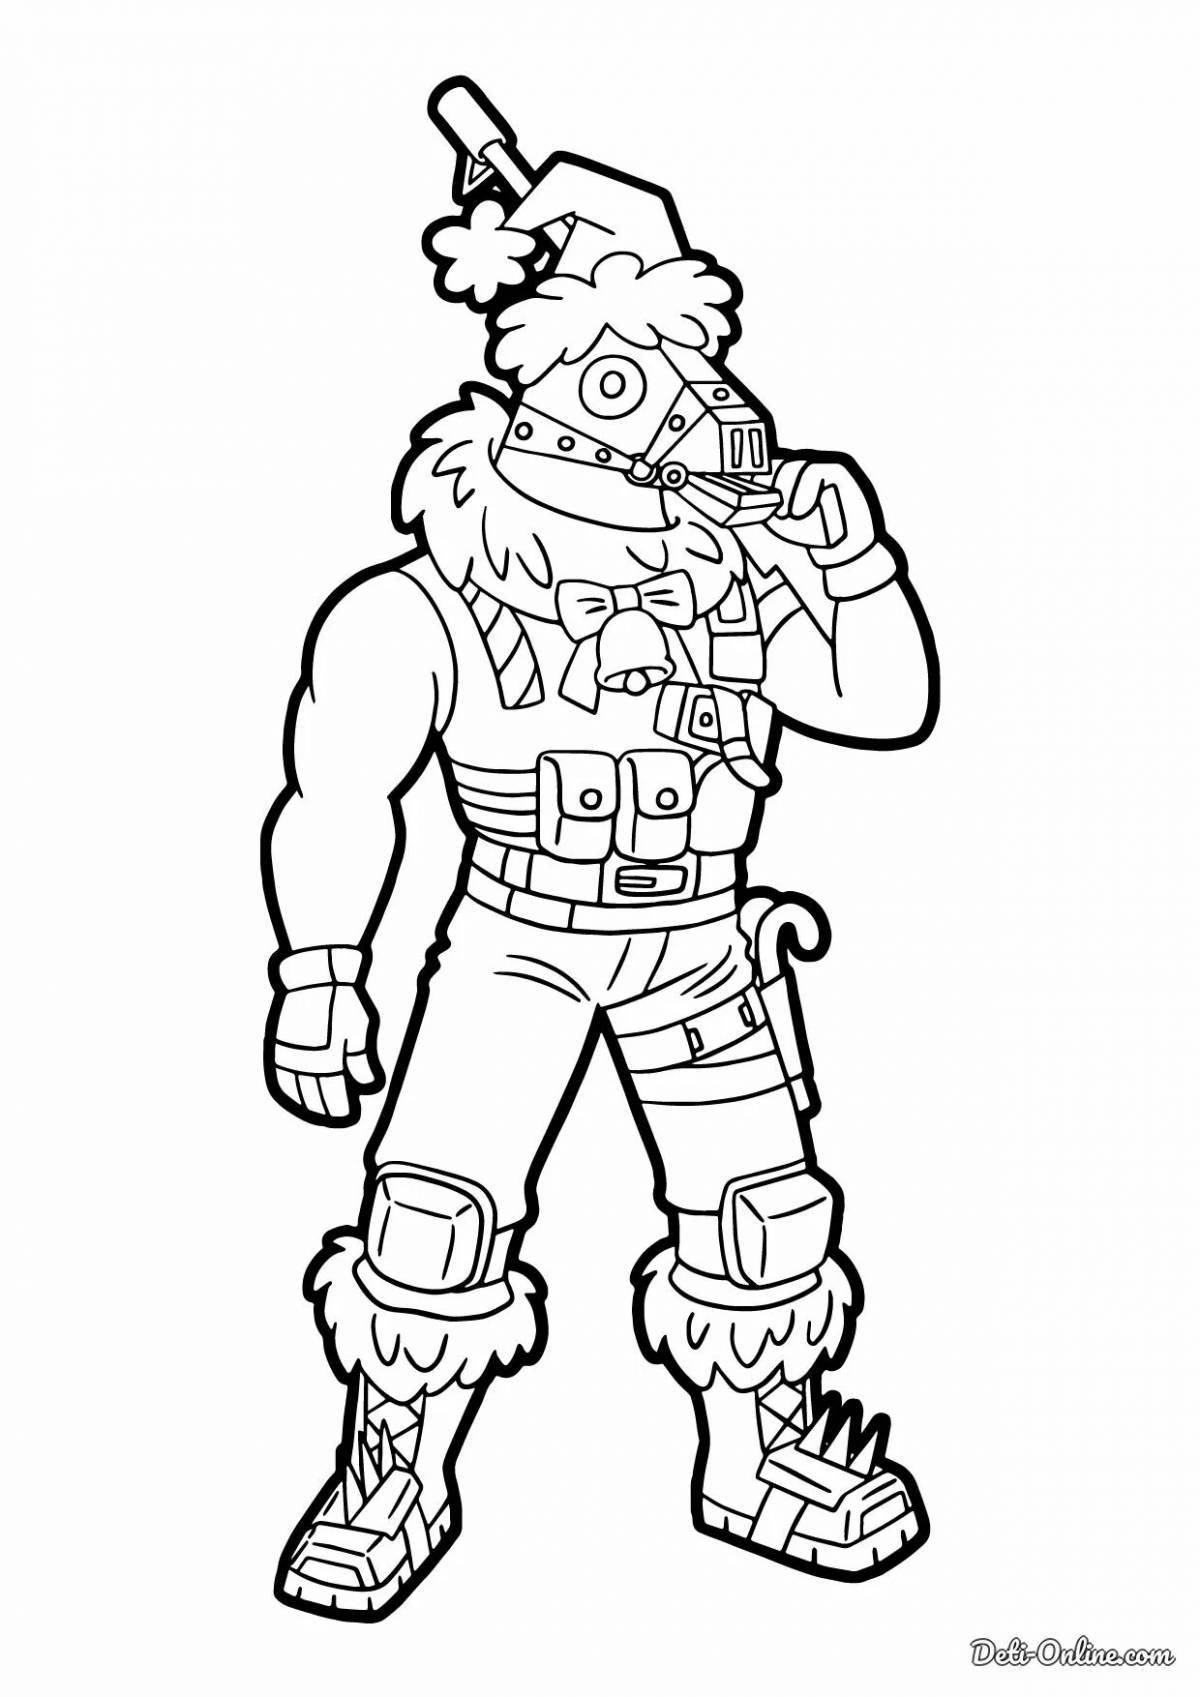 Colorable fortnite coloring page for boys